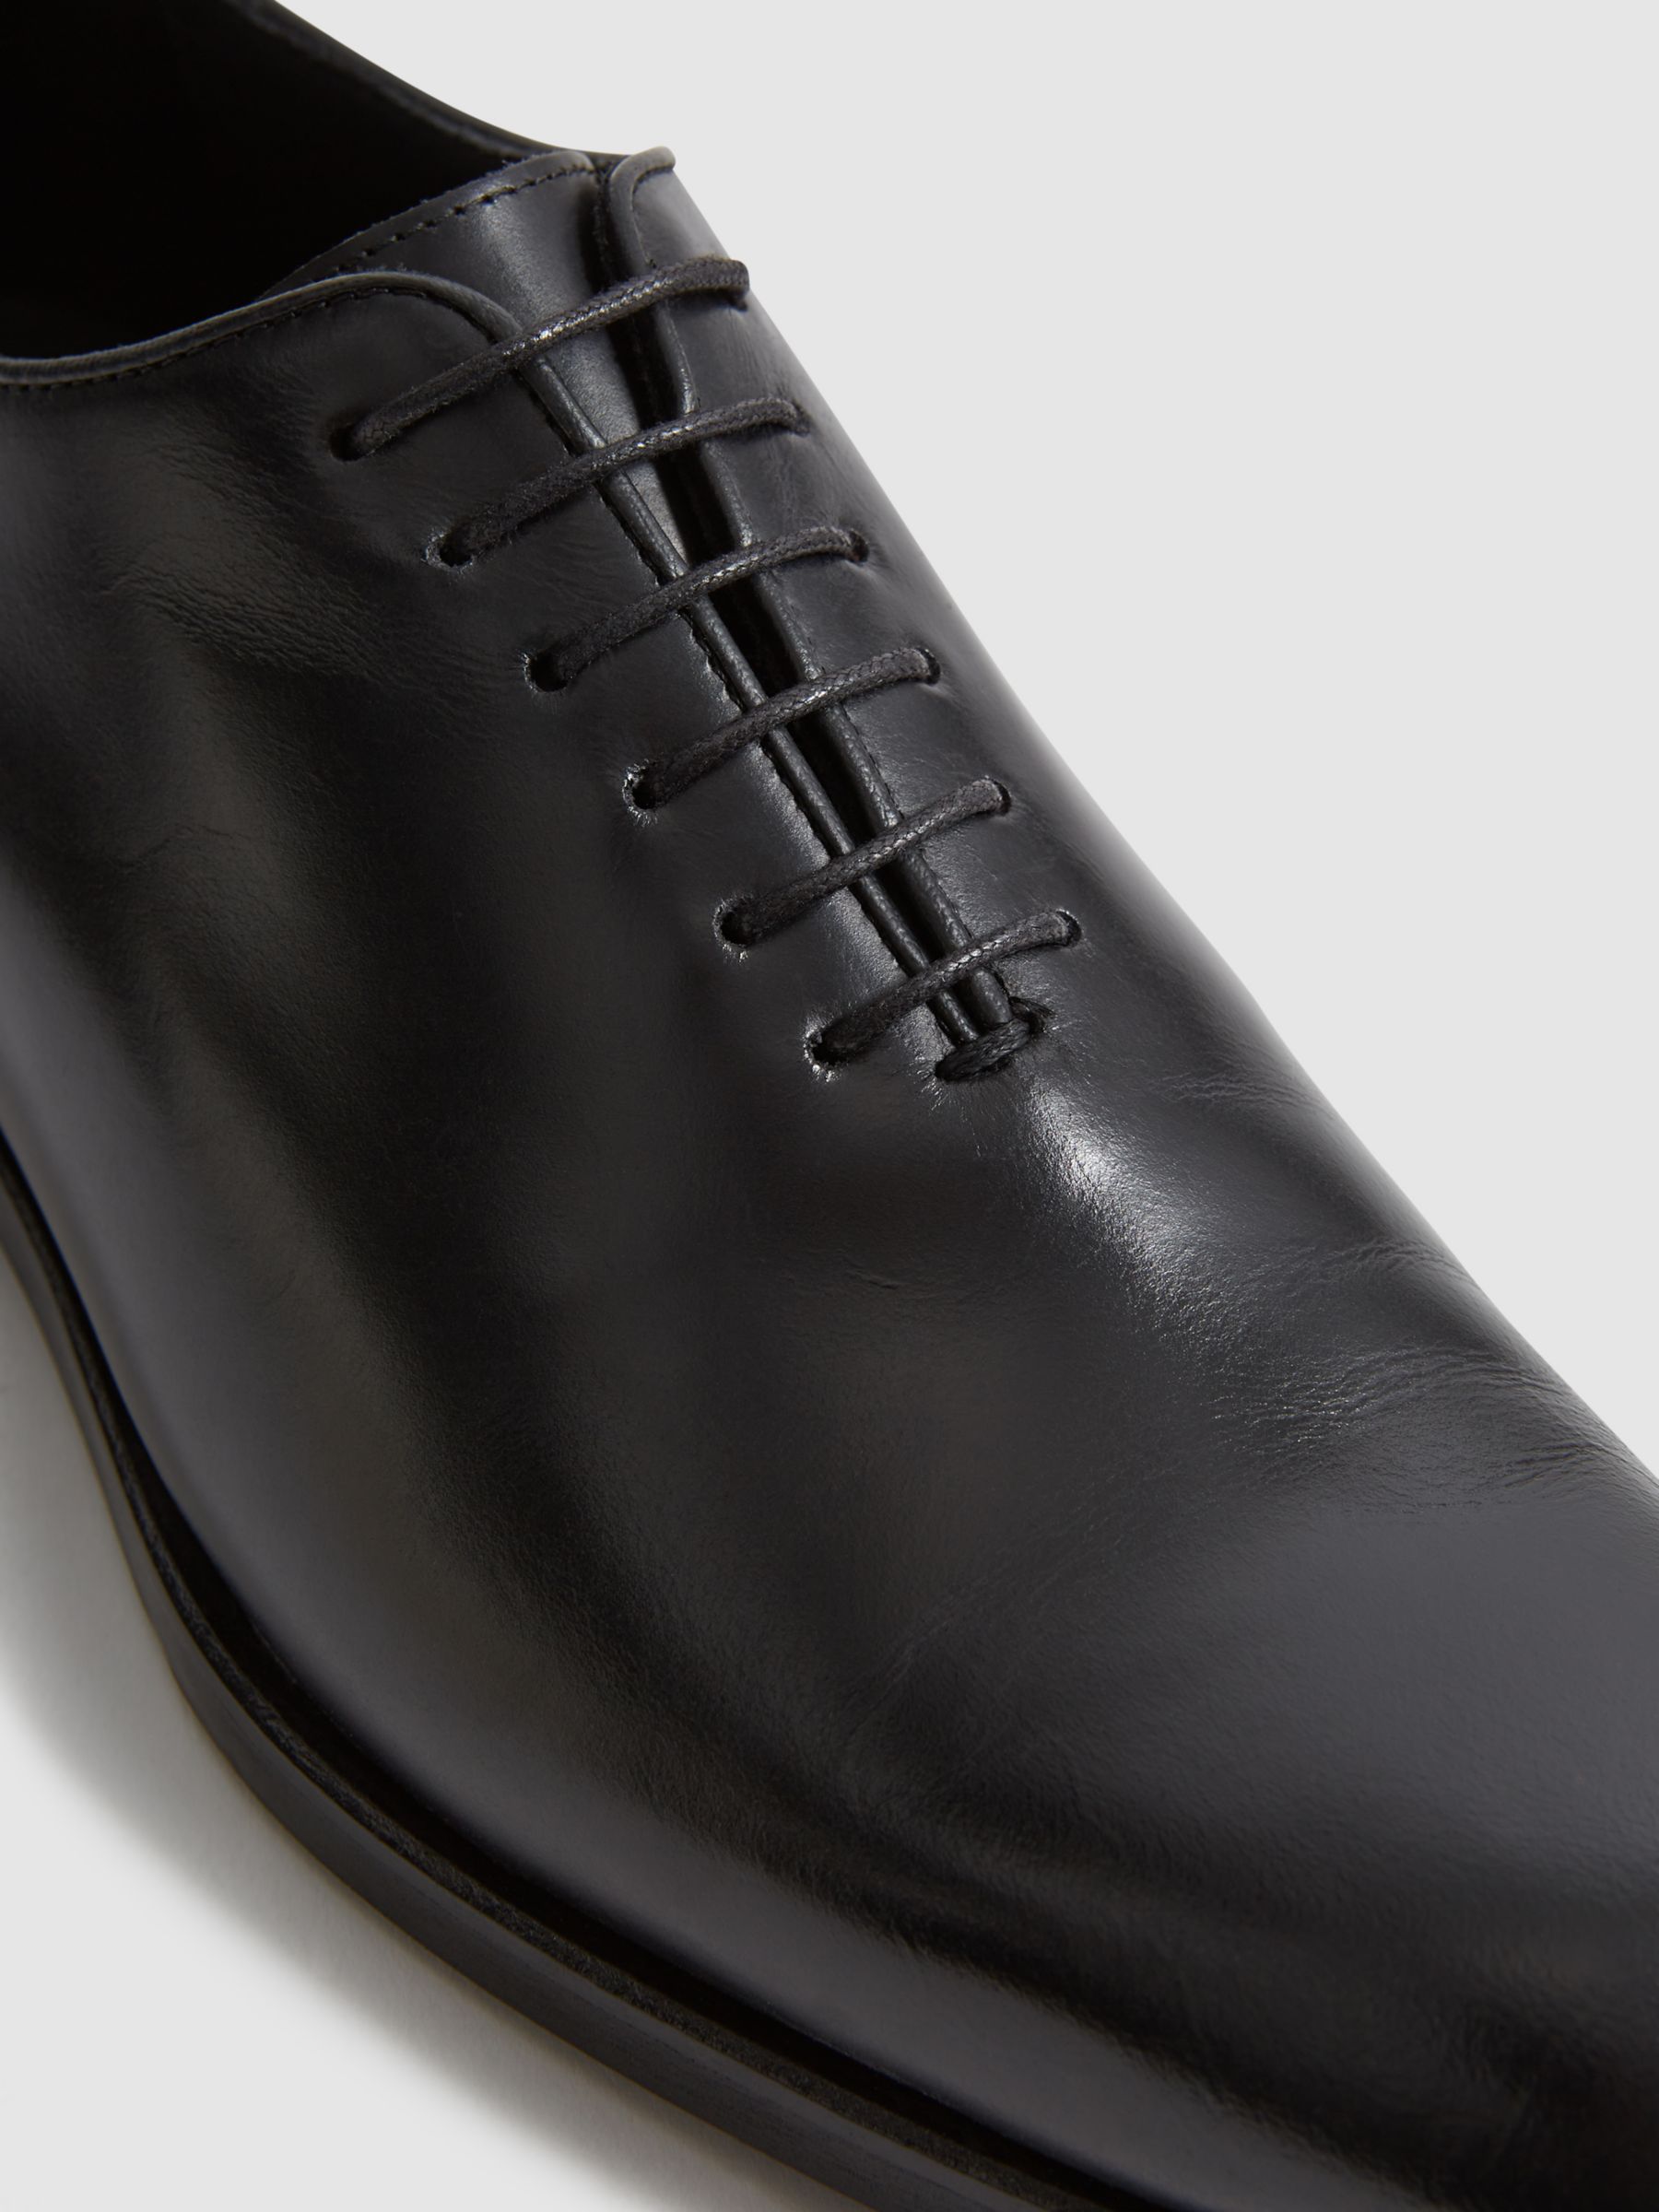 Reiss Bay Leather Whole Cut Shoes, Black at John Lewis & Partners